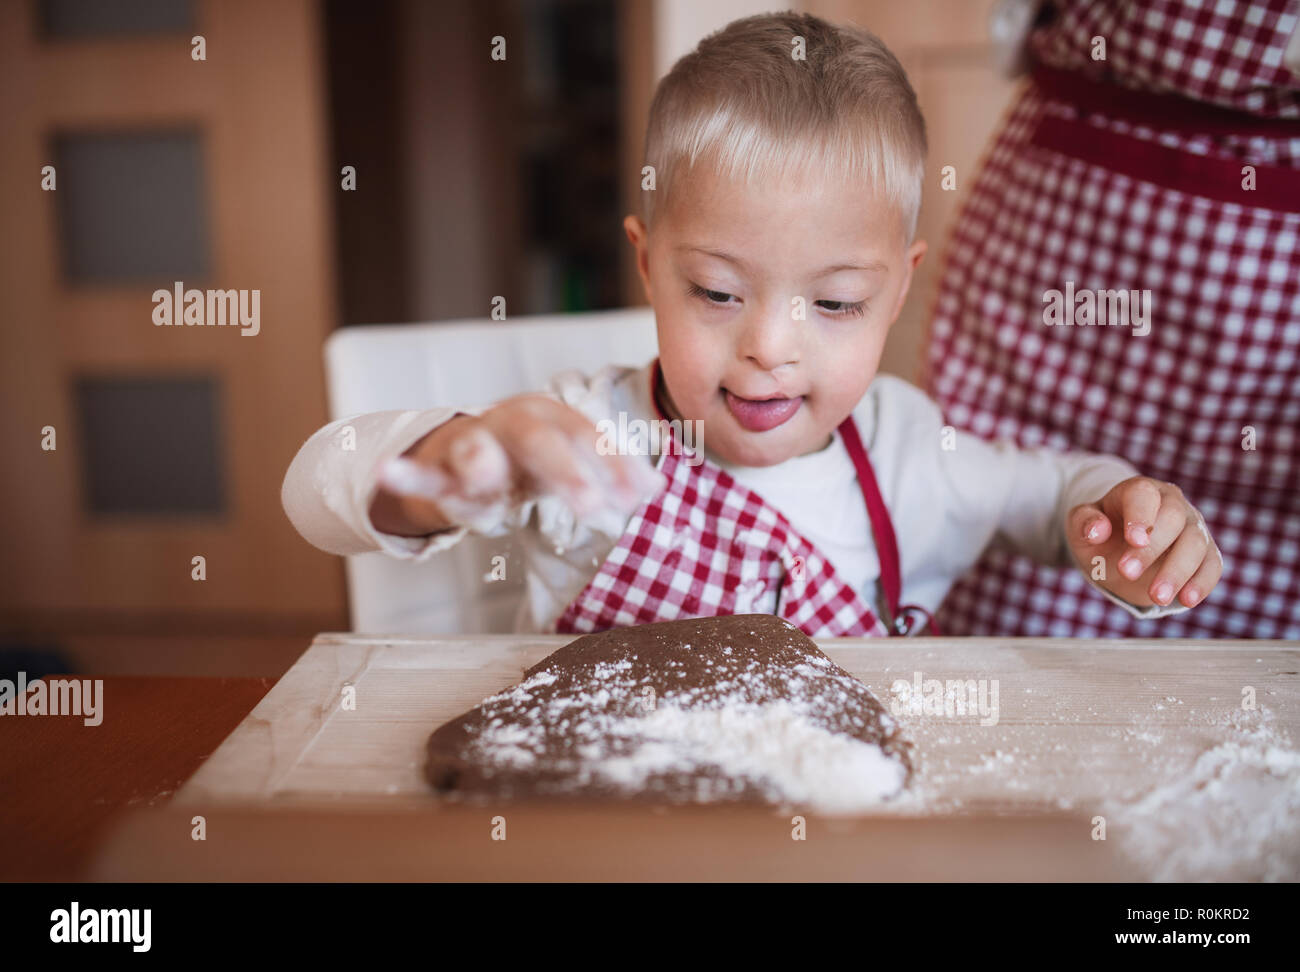 A handicapped down syndrome child with his mother indoors baking. Stock Photo